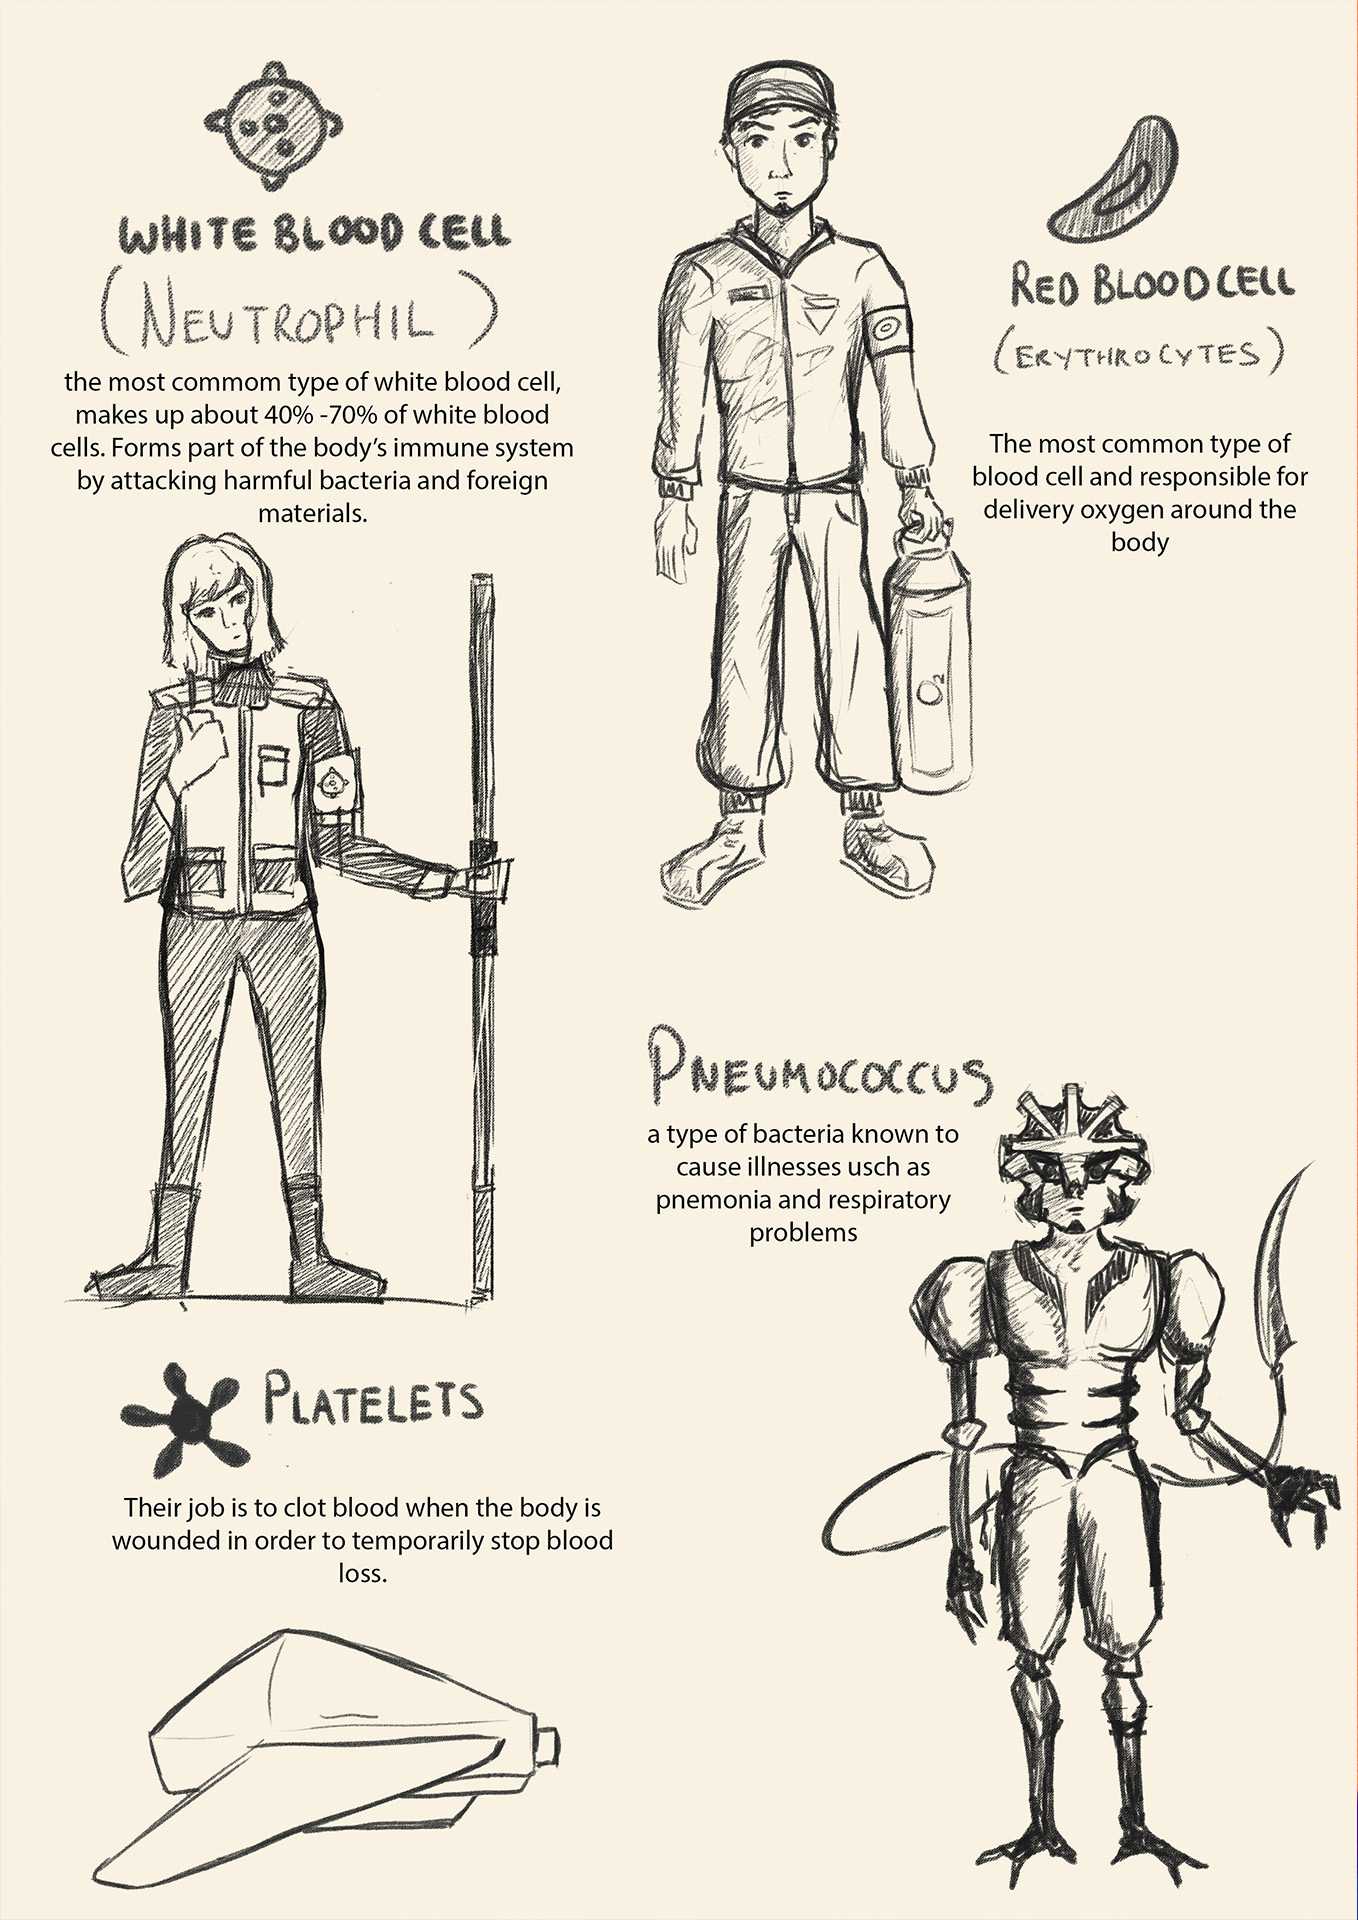 A page introducing and explaining the characters from his comic about blood cells within the human body.